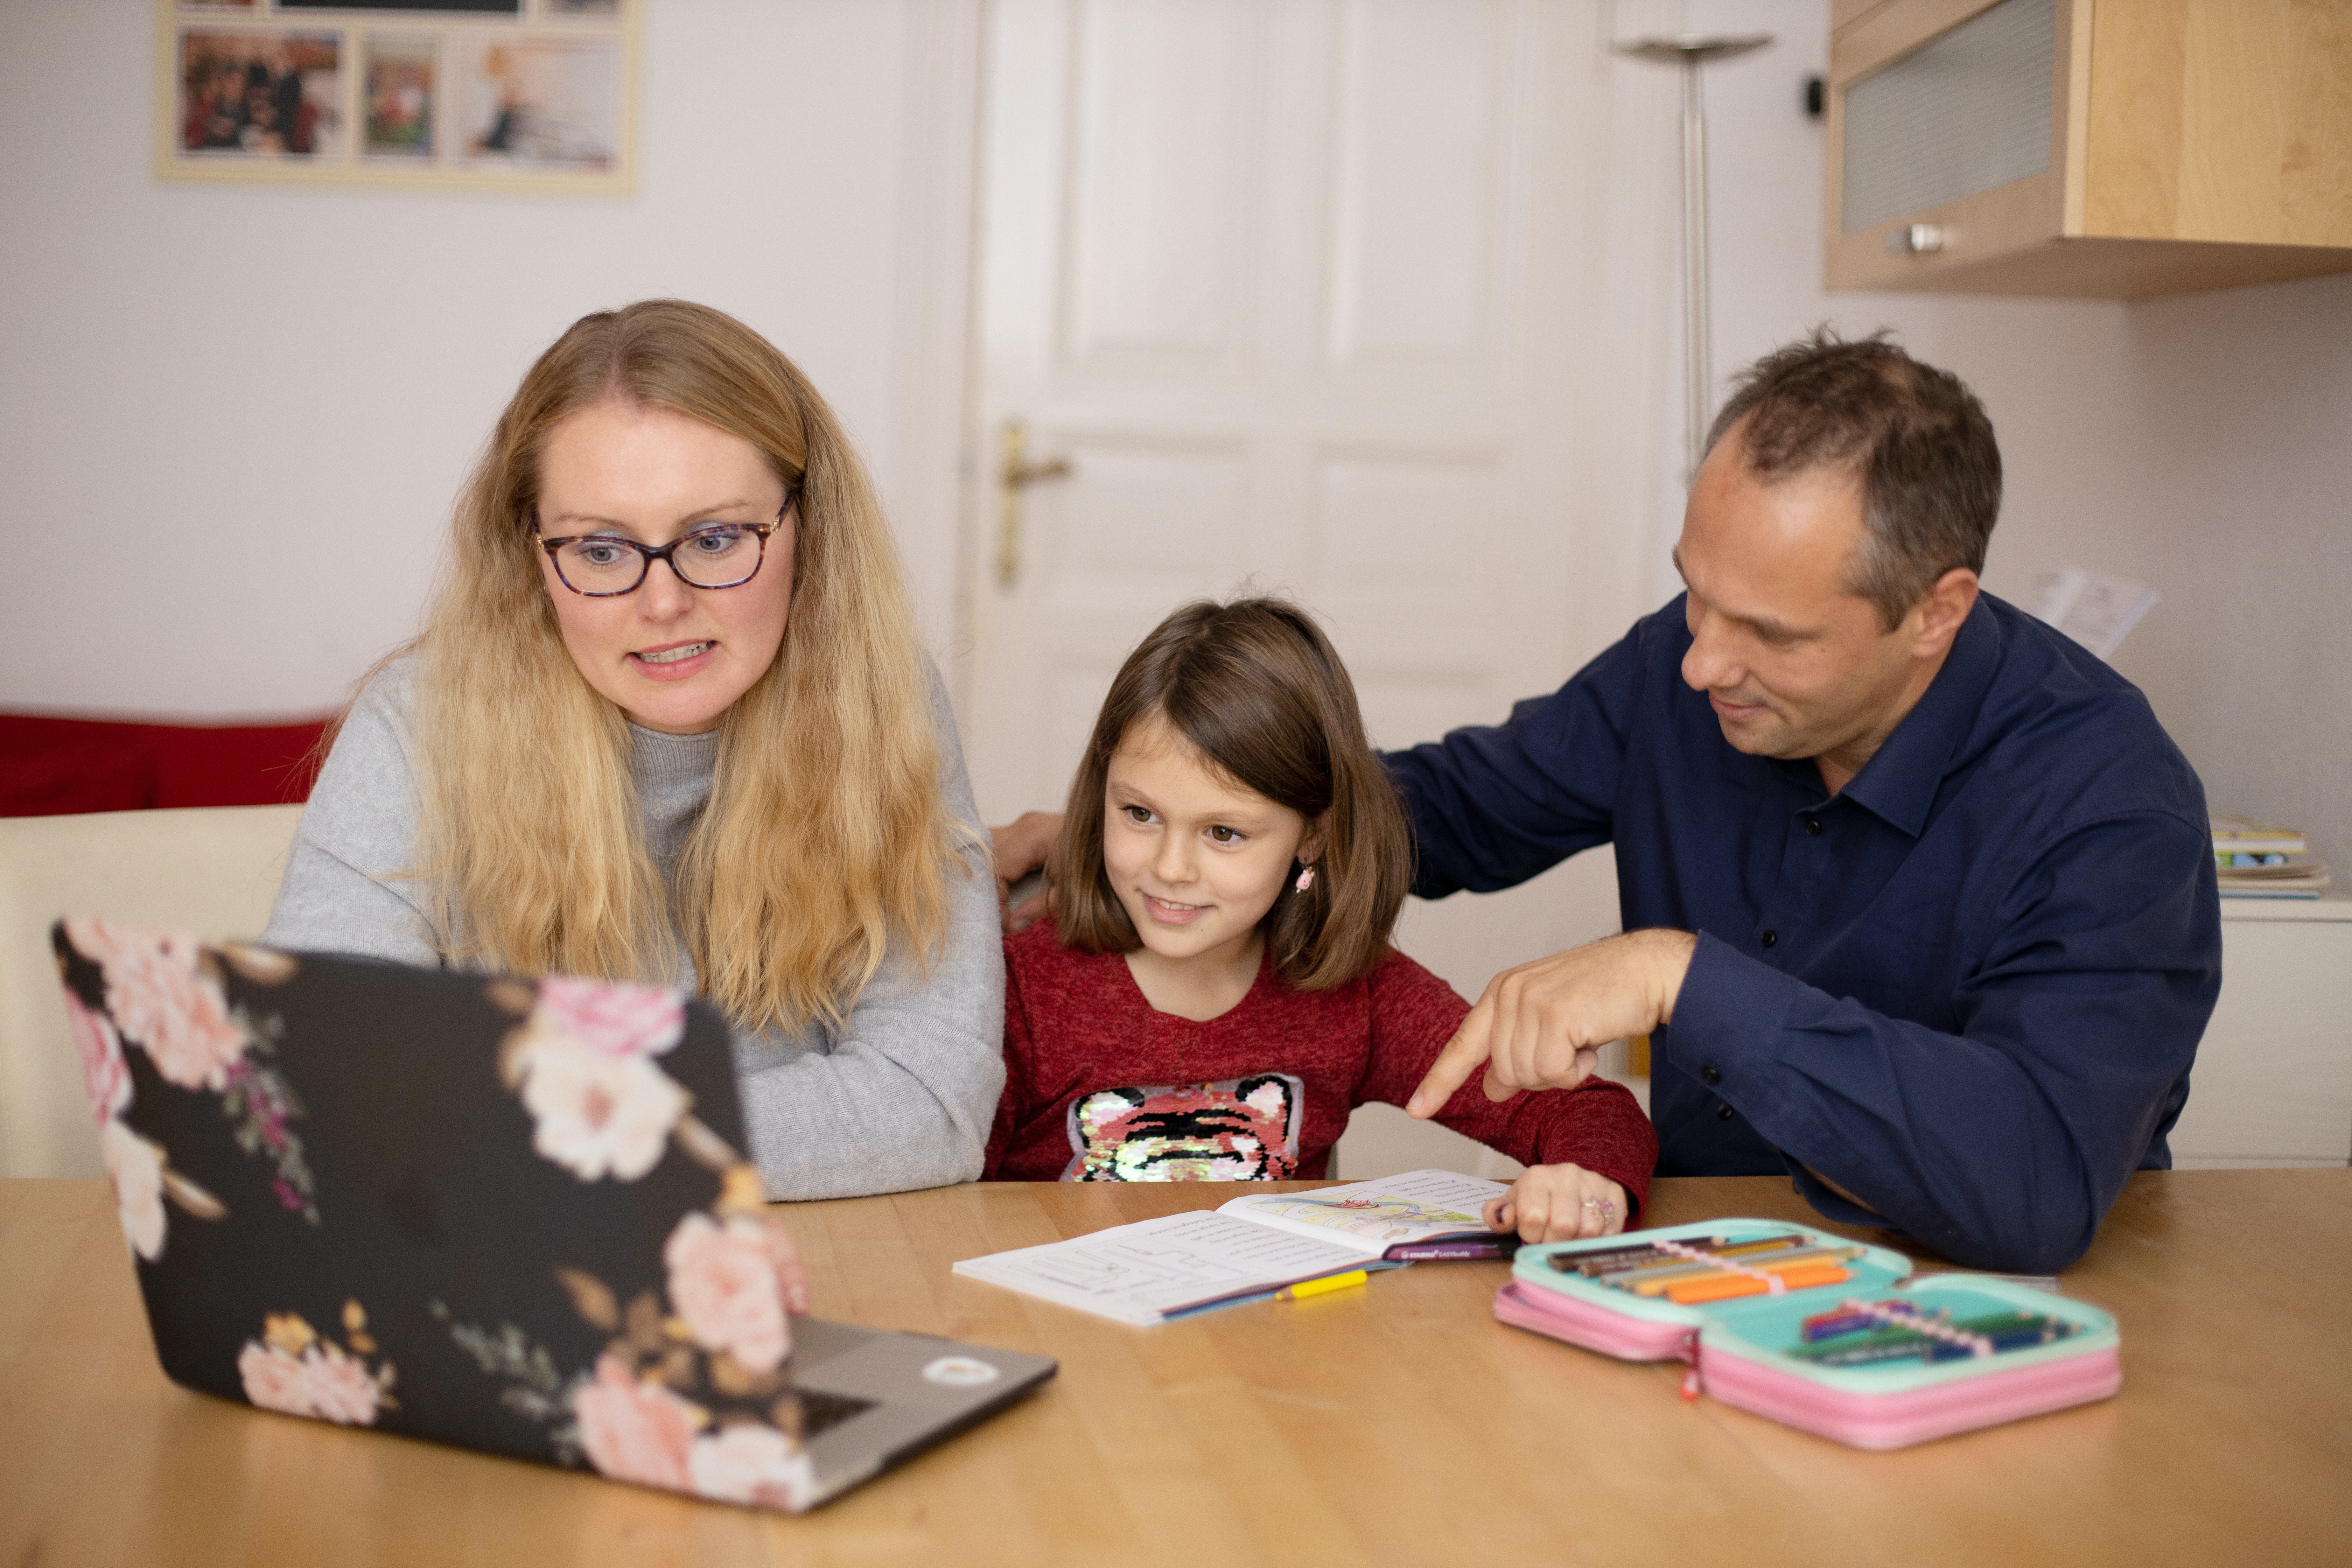 How Parents can Support Children’s Learning at Home